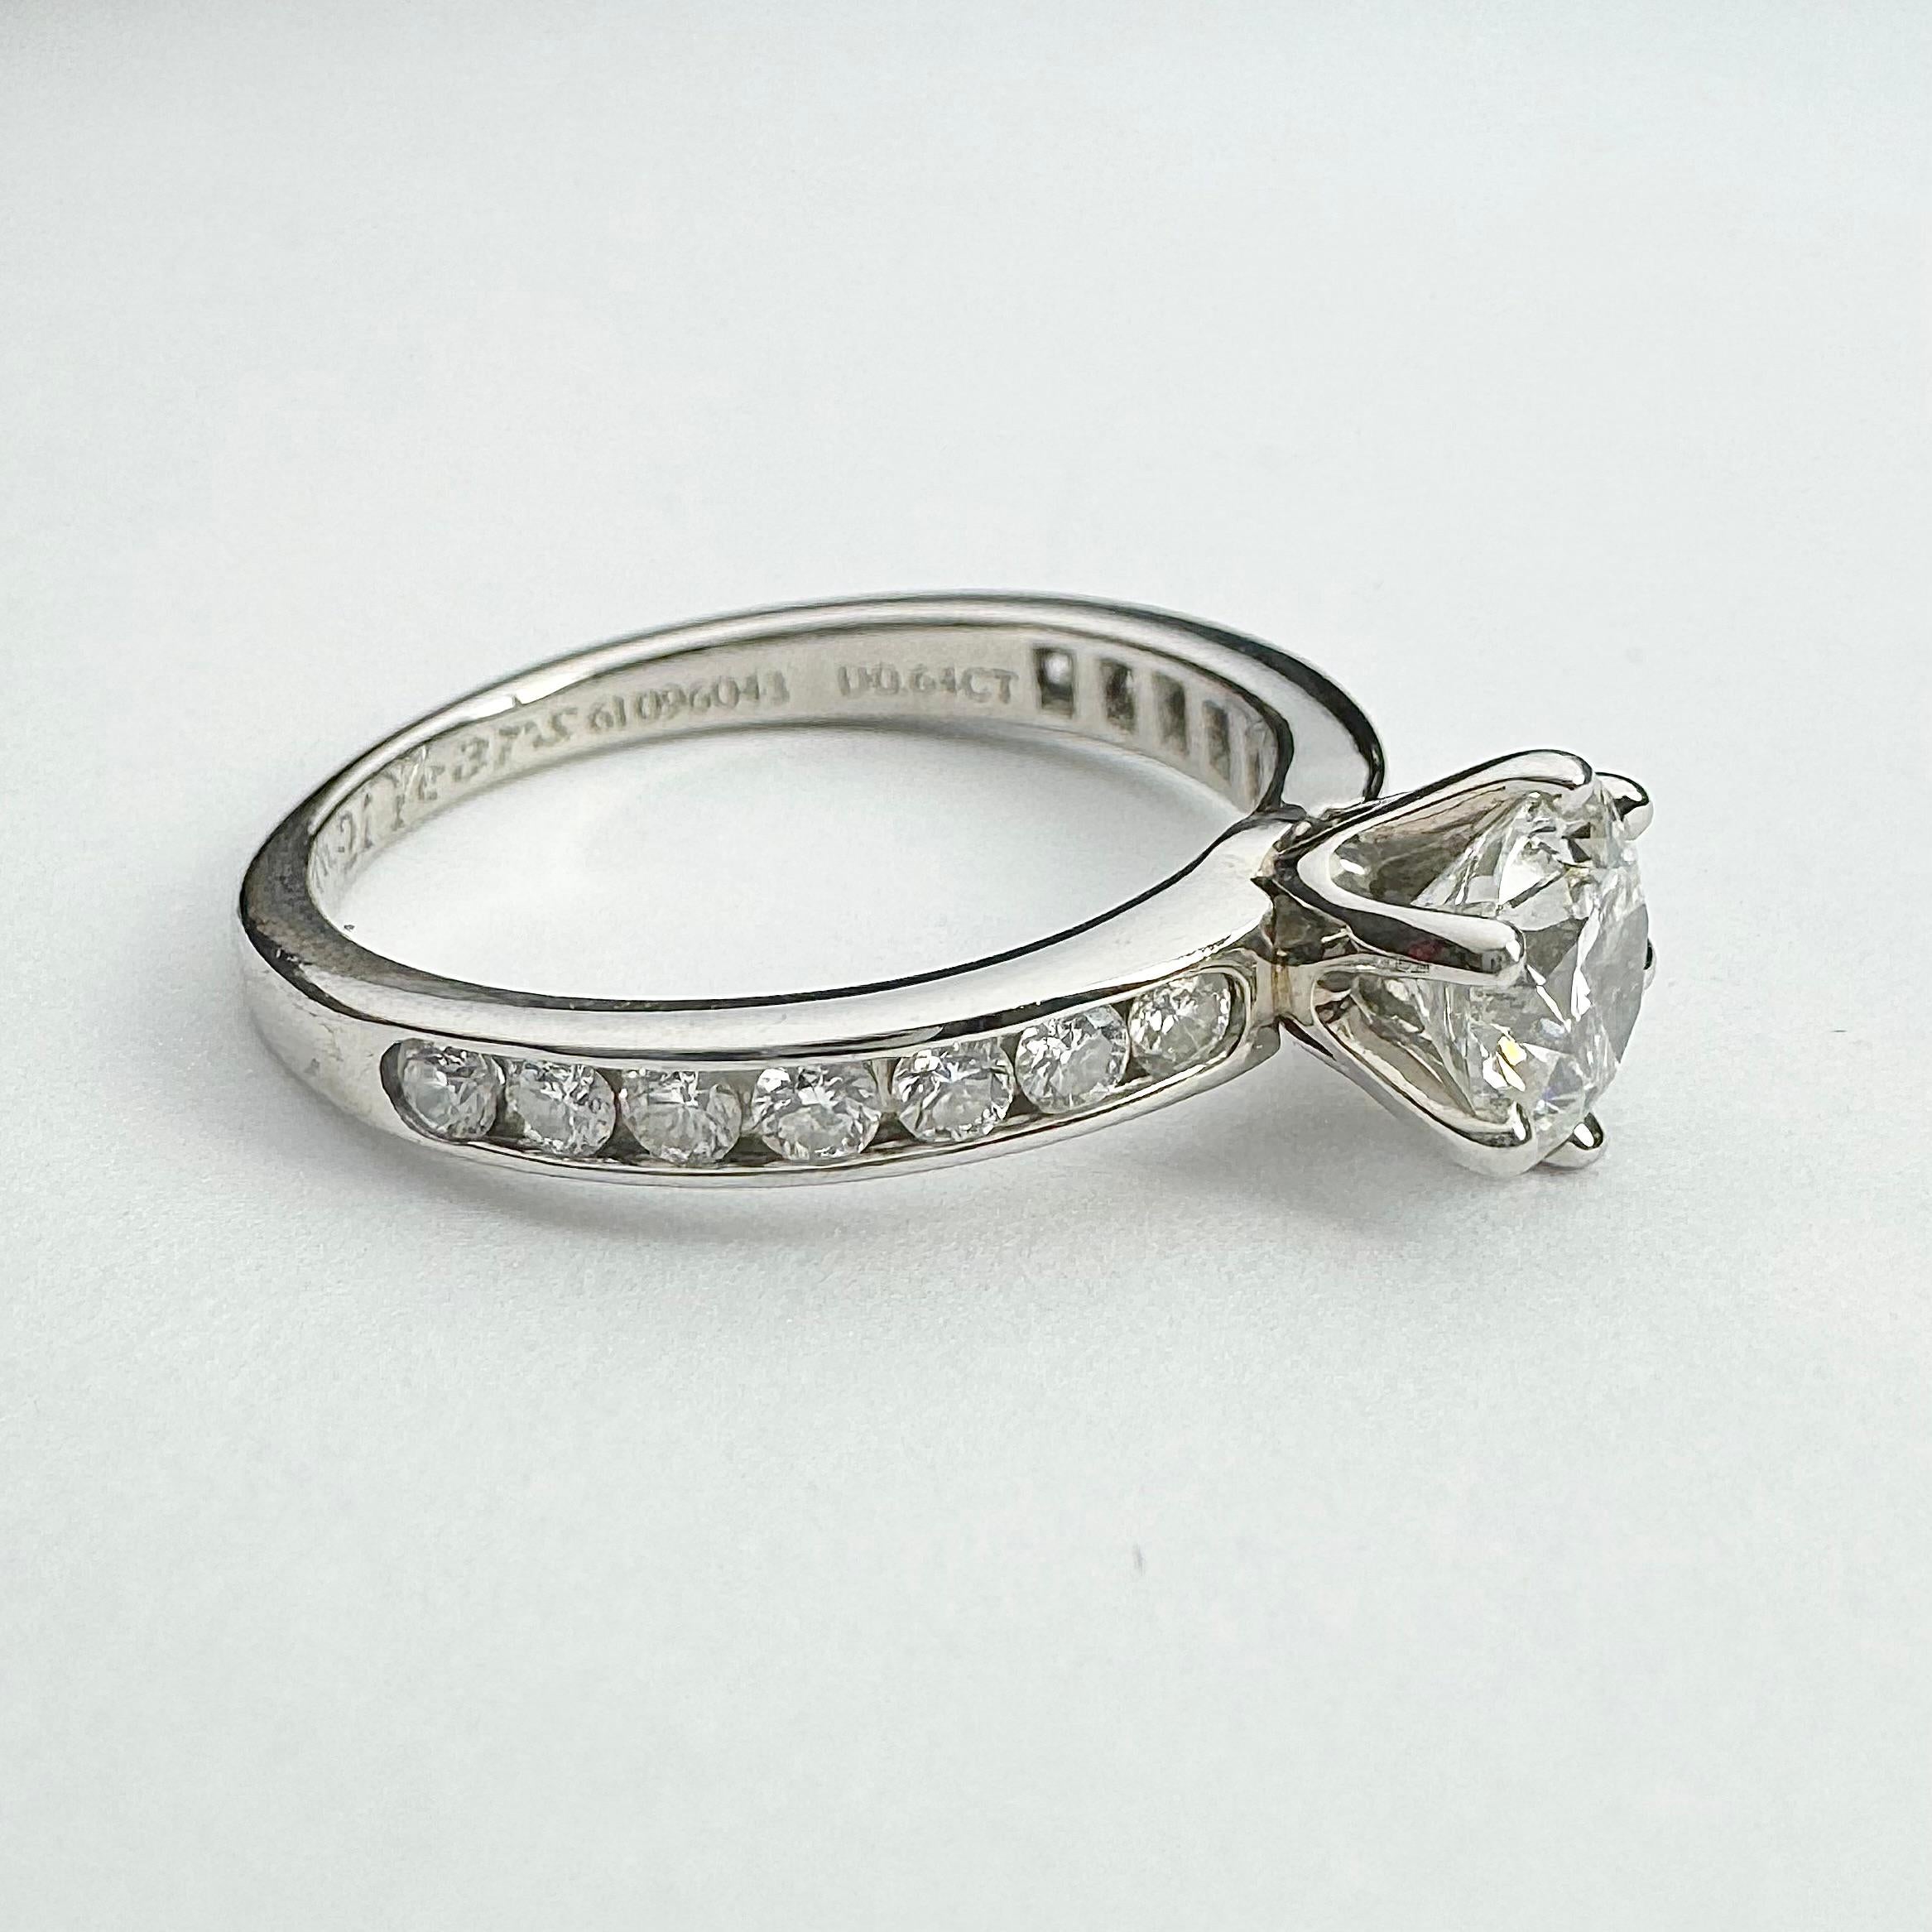 Tiffany & Co. 0.64ct Diamond Ring For Sale 1